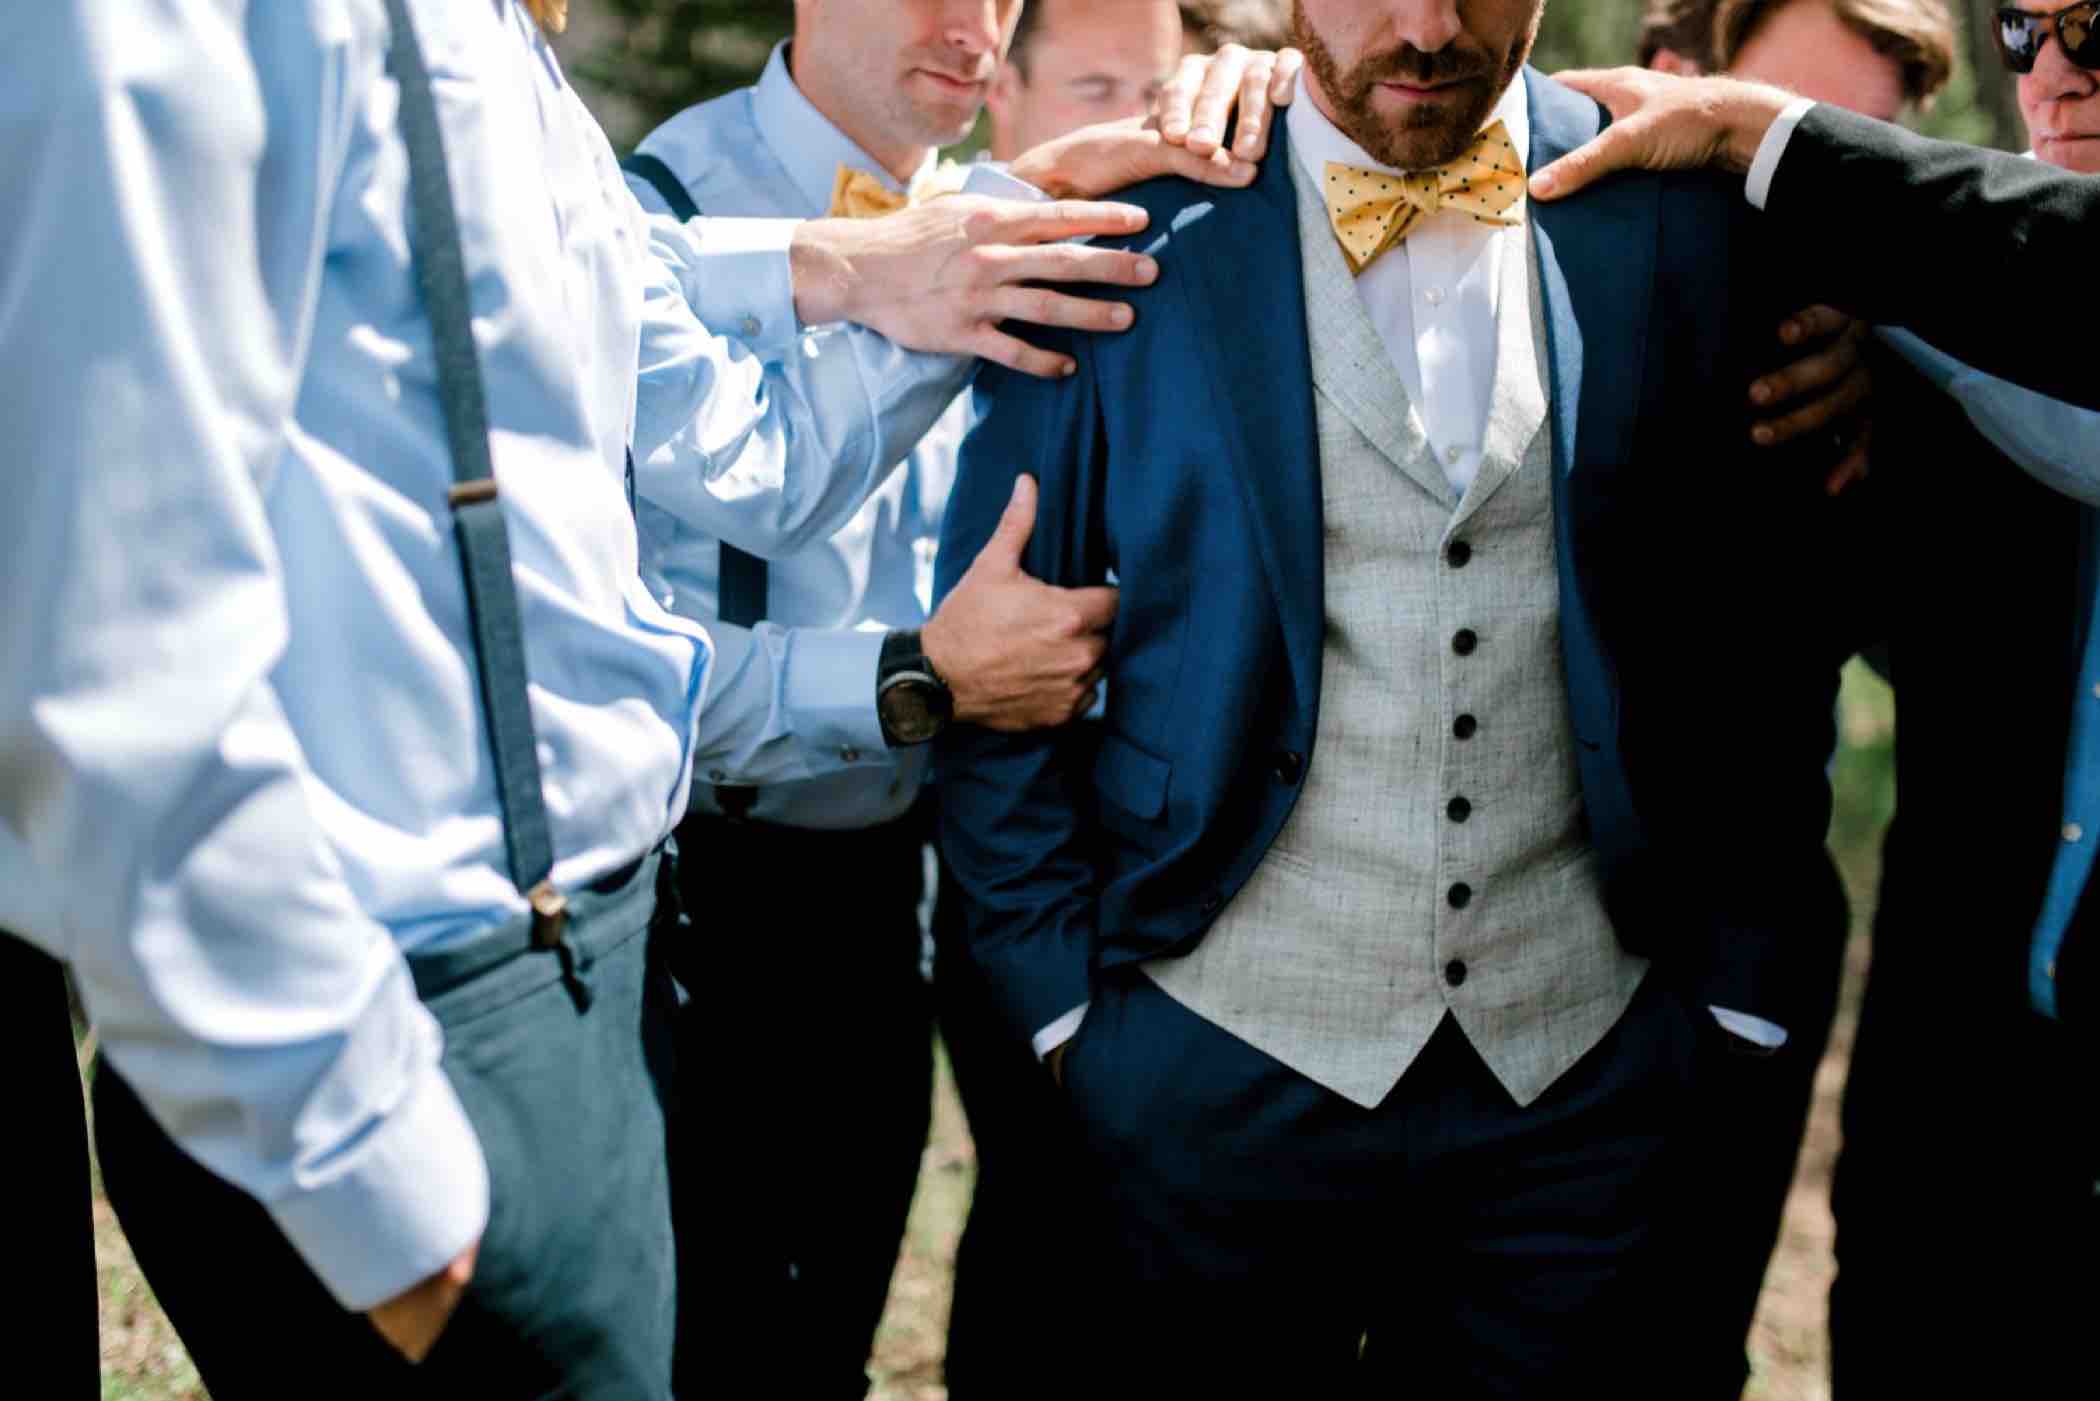 Groomsmen pray over the groom outside Piney River Ranch in Vail in the Colorado Rocky Mountains. Photo by Ali and Garrett, Romantic, Adventurous, Nostalgic Wedding Photographers.